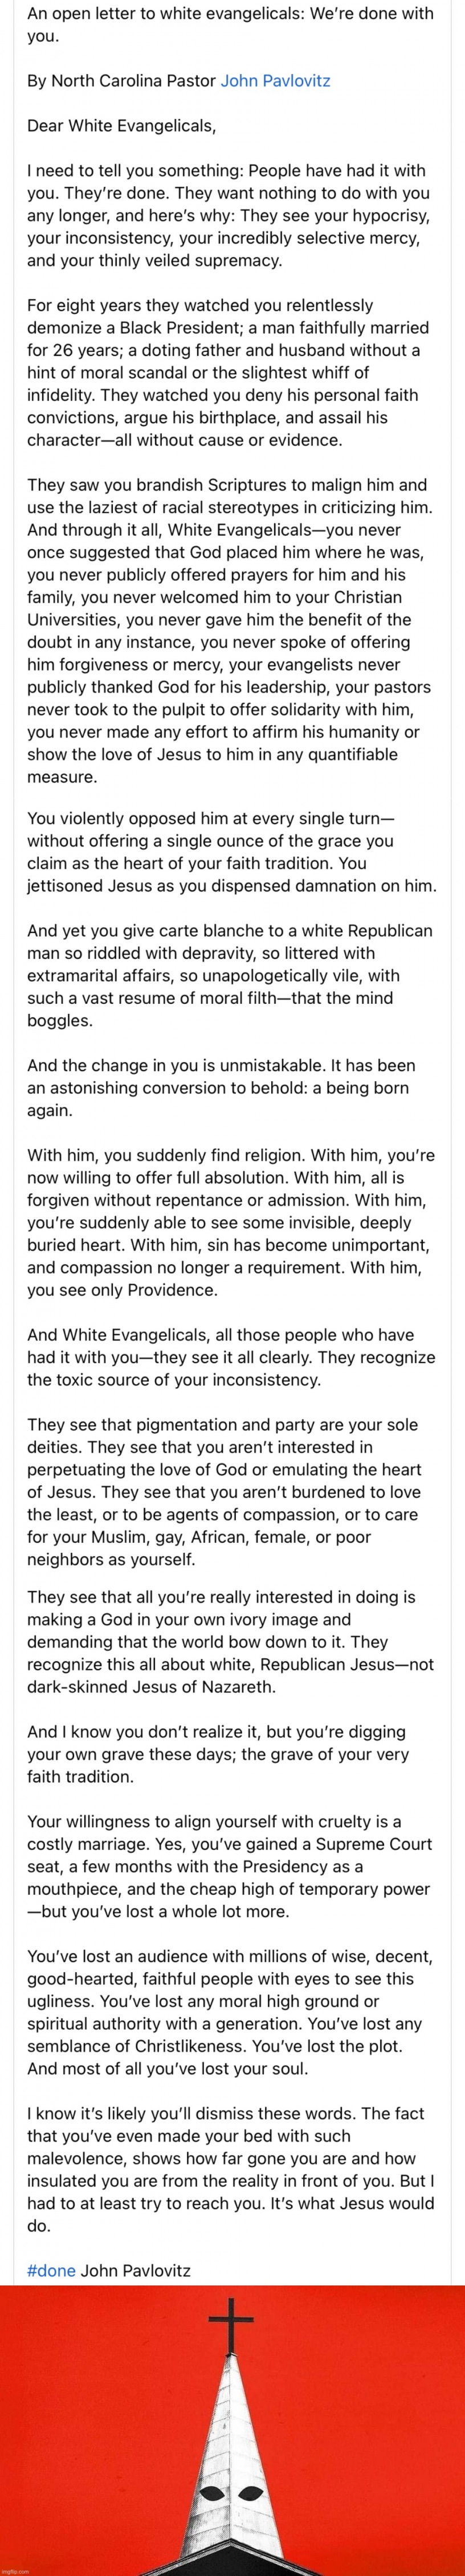 An open letter to white evangelicals Blank Meme Template